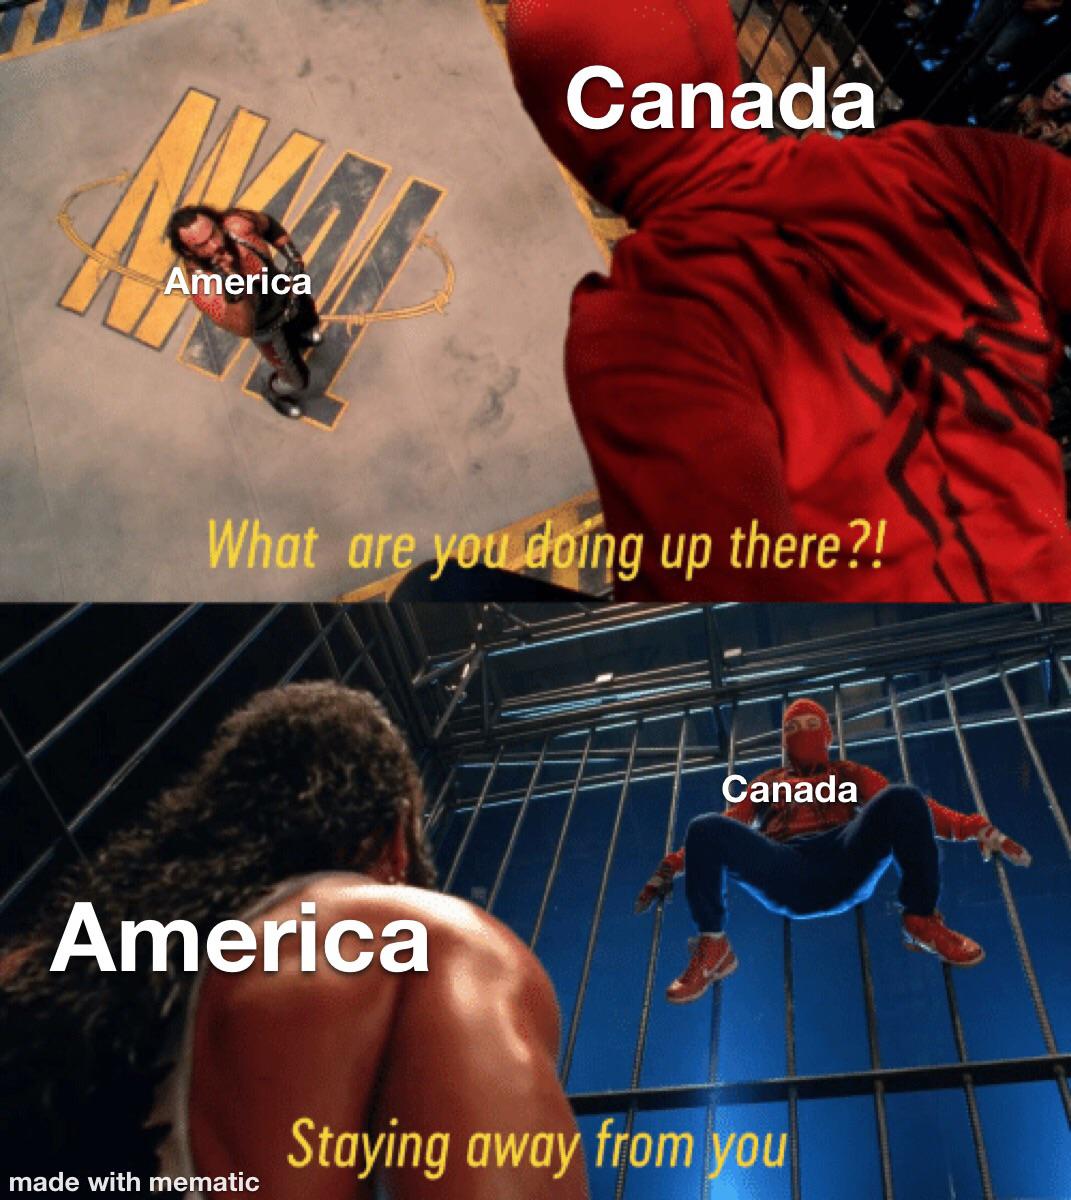 Dank, America, Canadian, USA, Toronto, The US Dank Memes Dank, America, Canadian, USA, Toronto, The US text: Canada Åmerica What areyouågfqg up there?! anada America Staying away from you made with mematic 